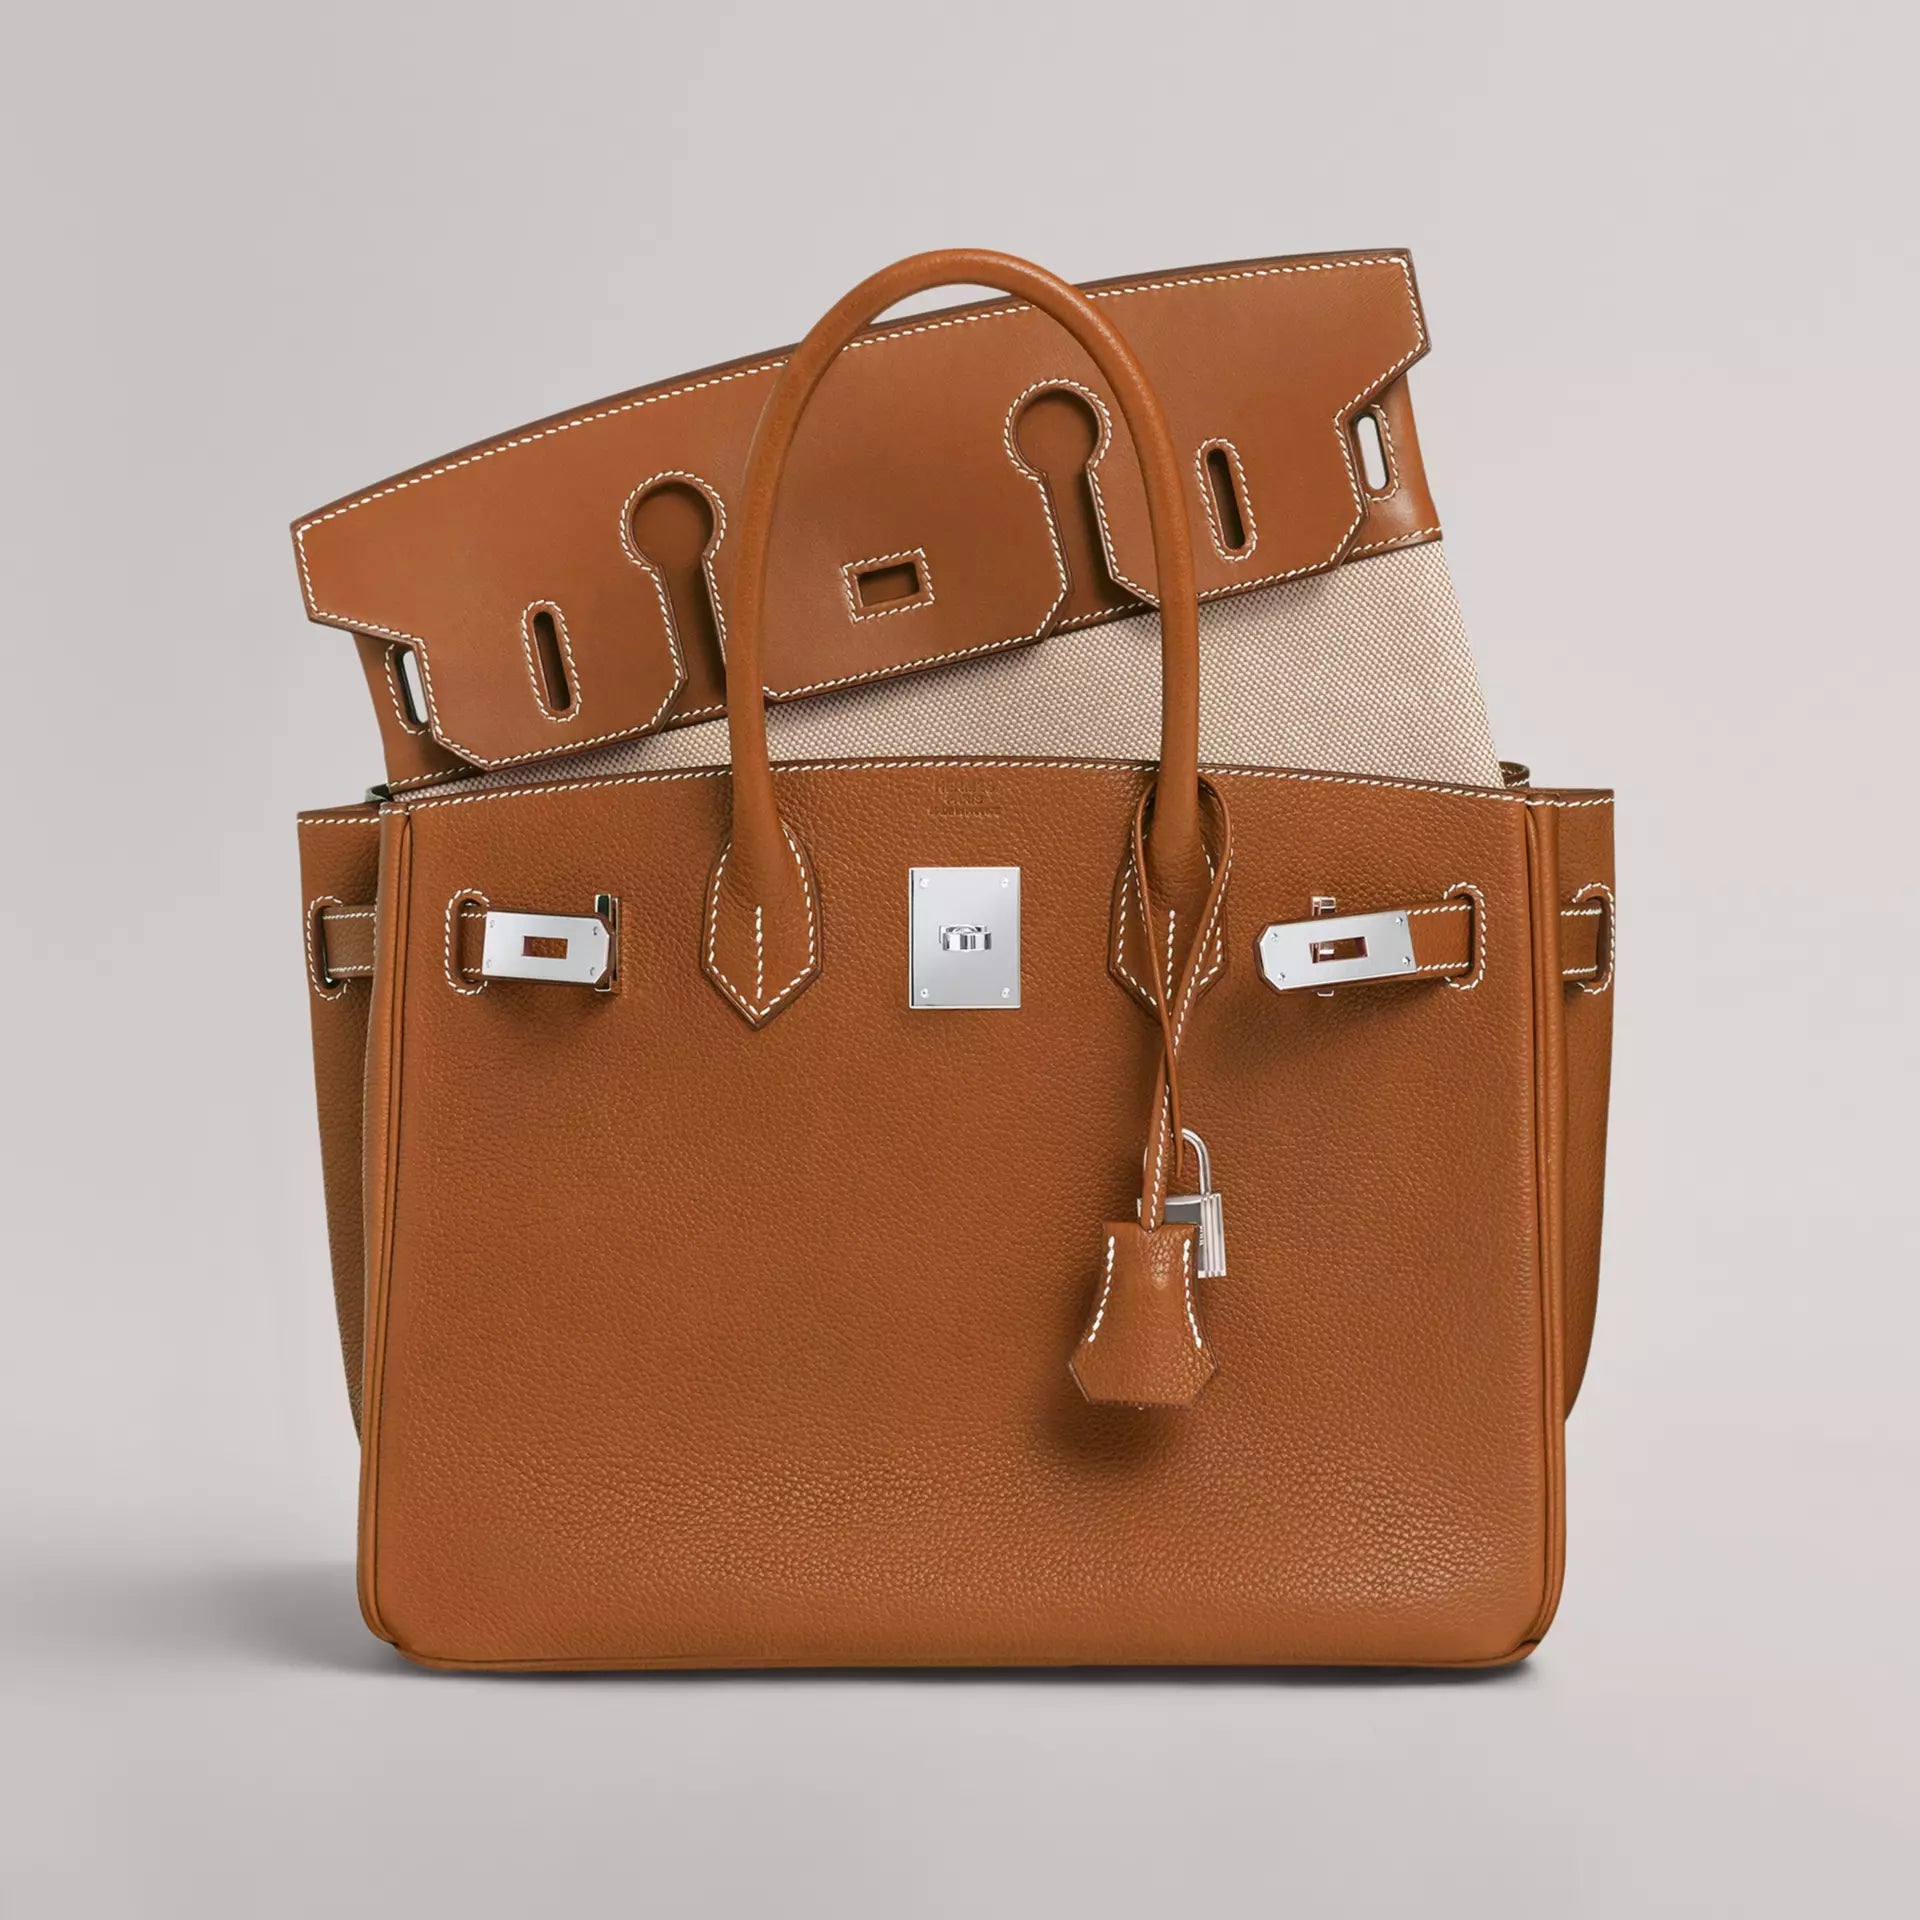 INSTOCK] Hermes Picotin 18, Etoupe in Clemence GHW Stamp D, Luxury